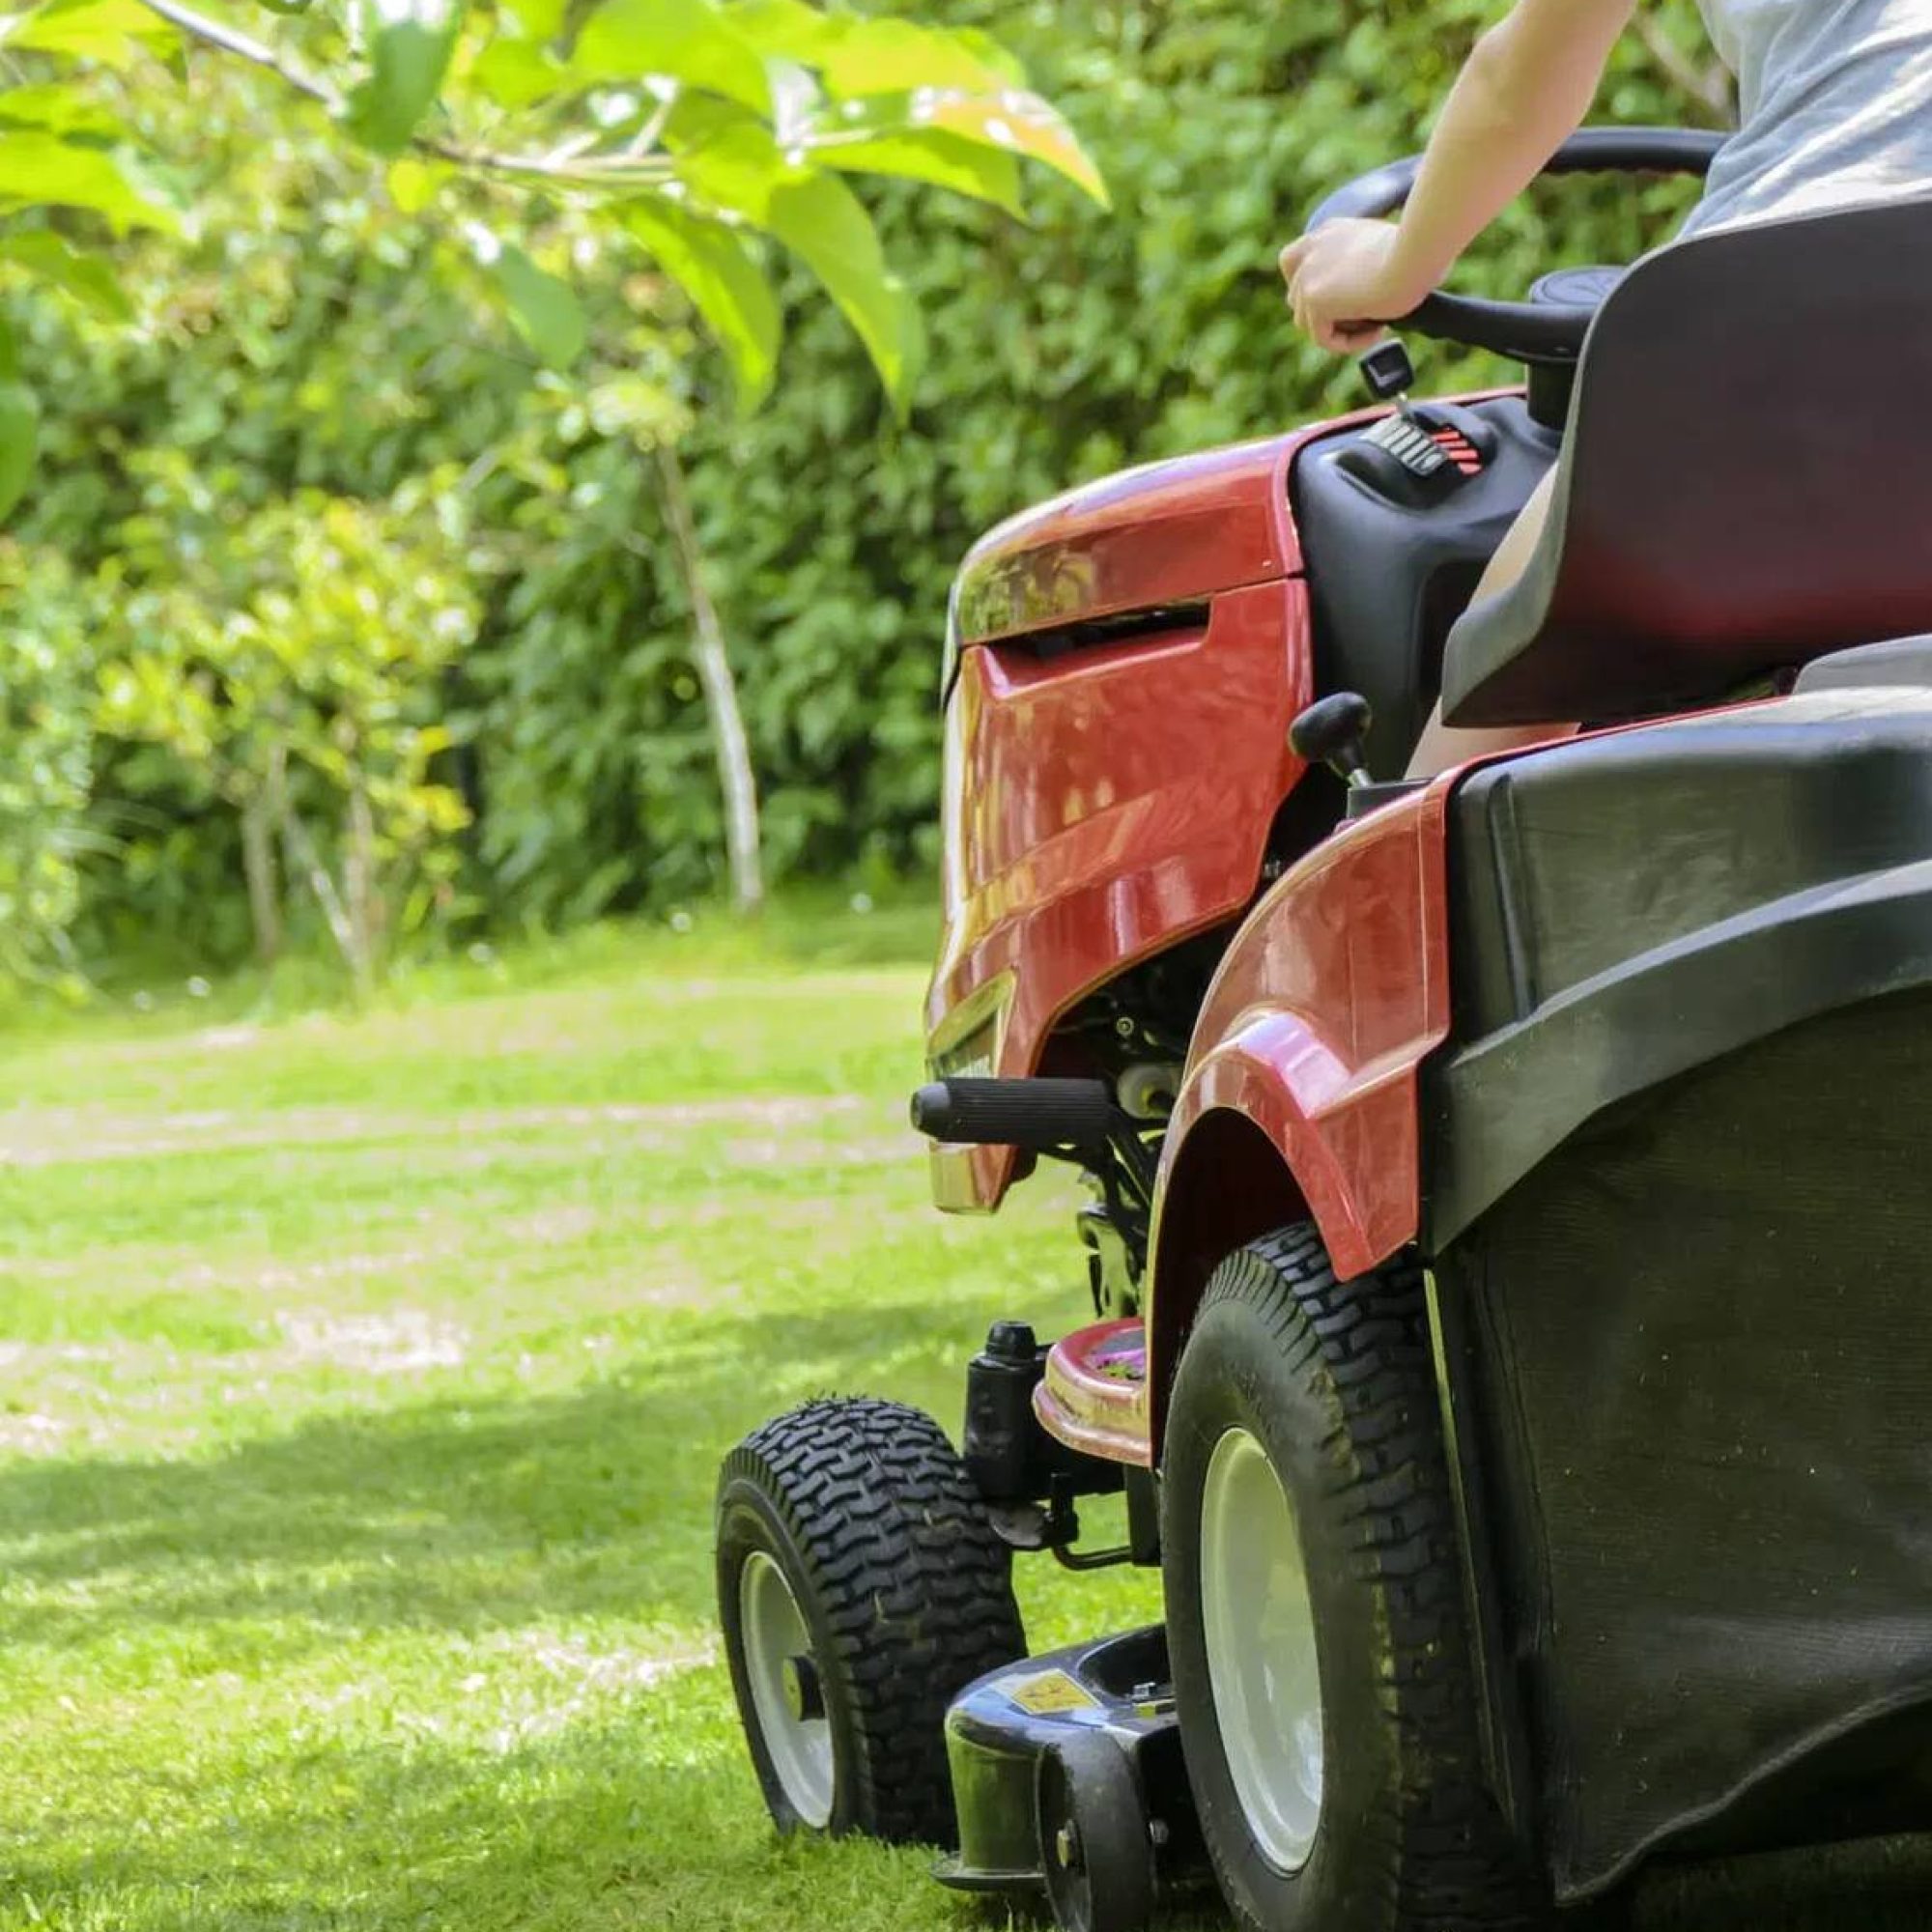 Mowing-the-grass-with-a-riding-mower